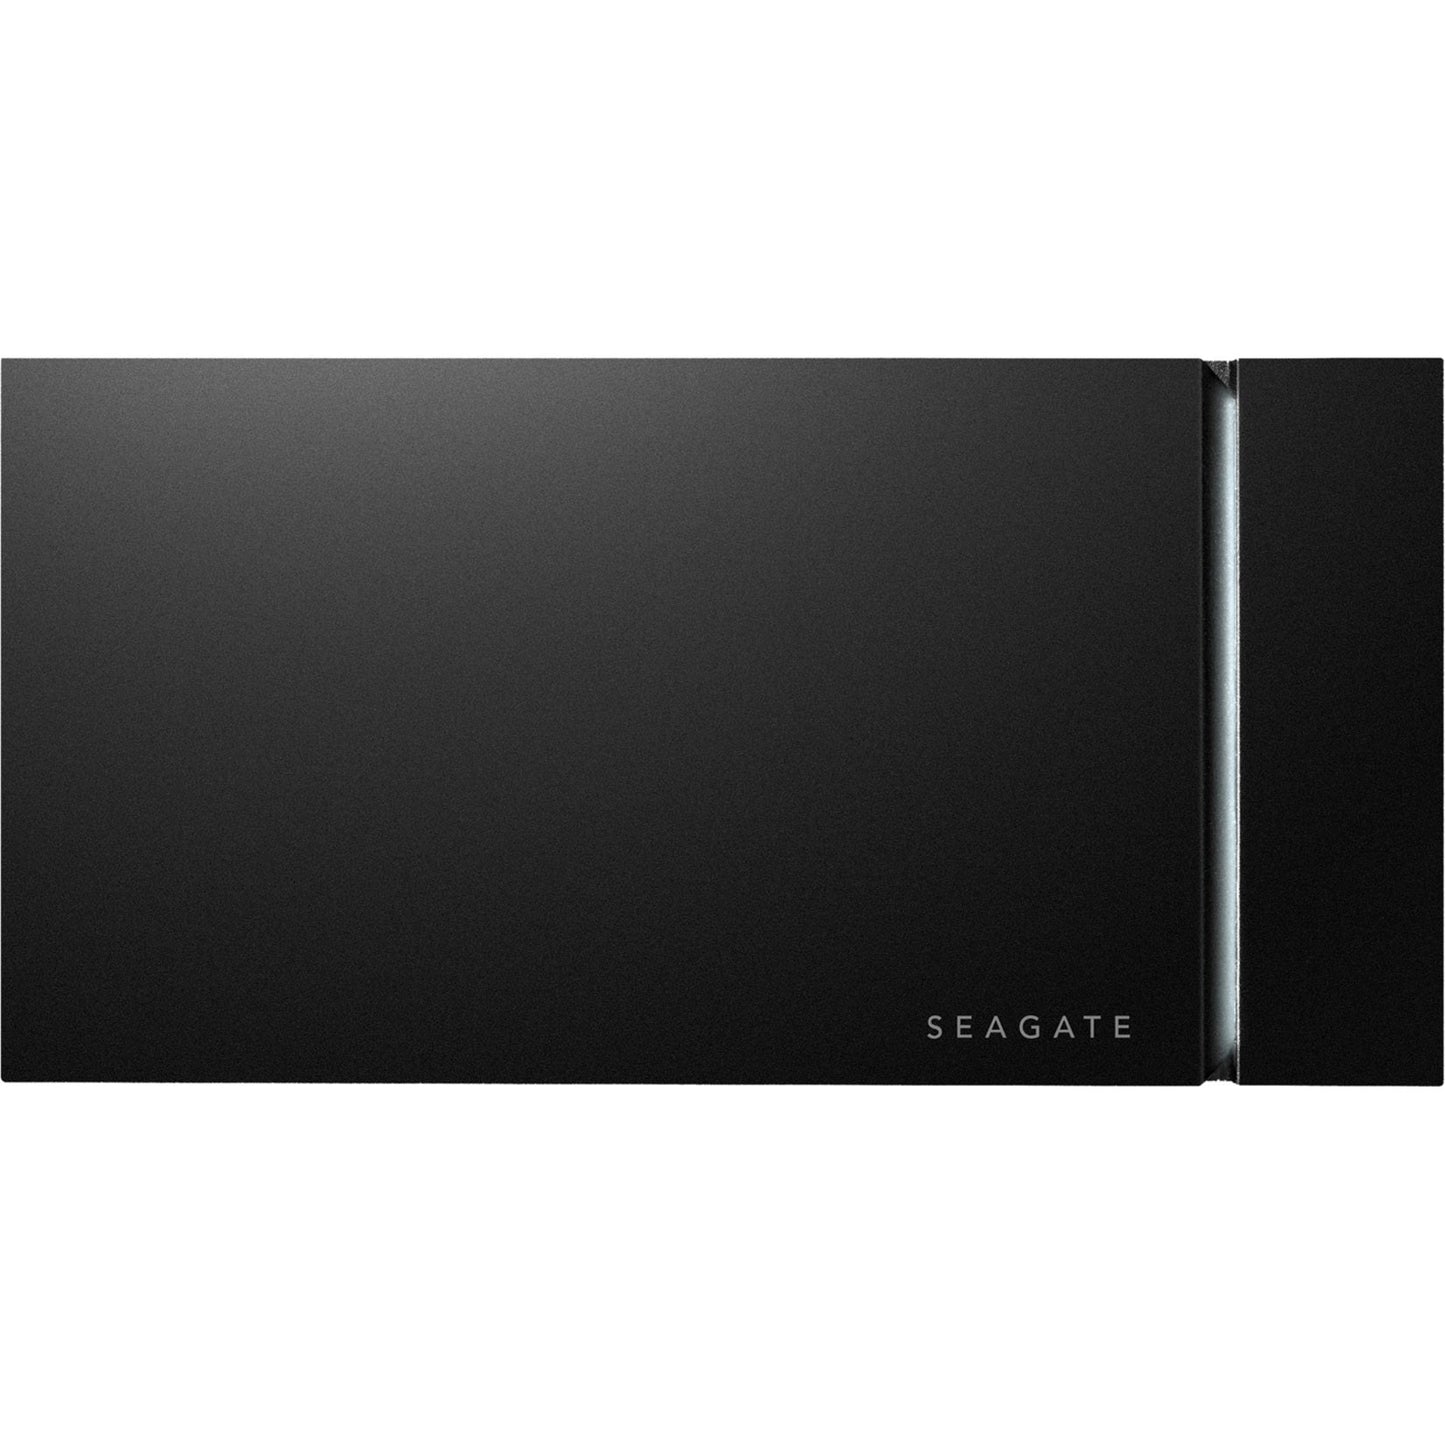 Seagate FireCuda STJP2000400 2 TB Portable Solid State Drive - External